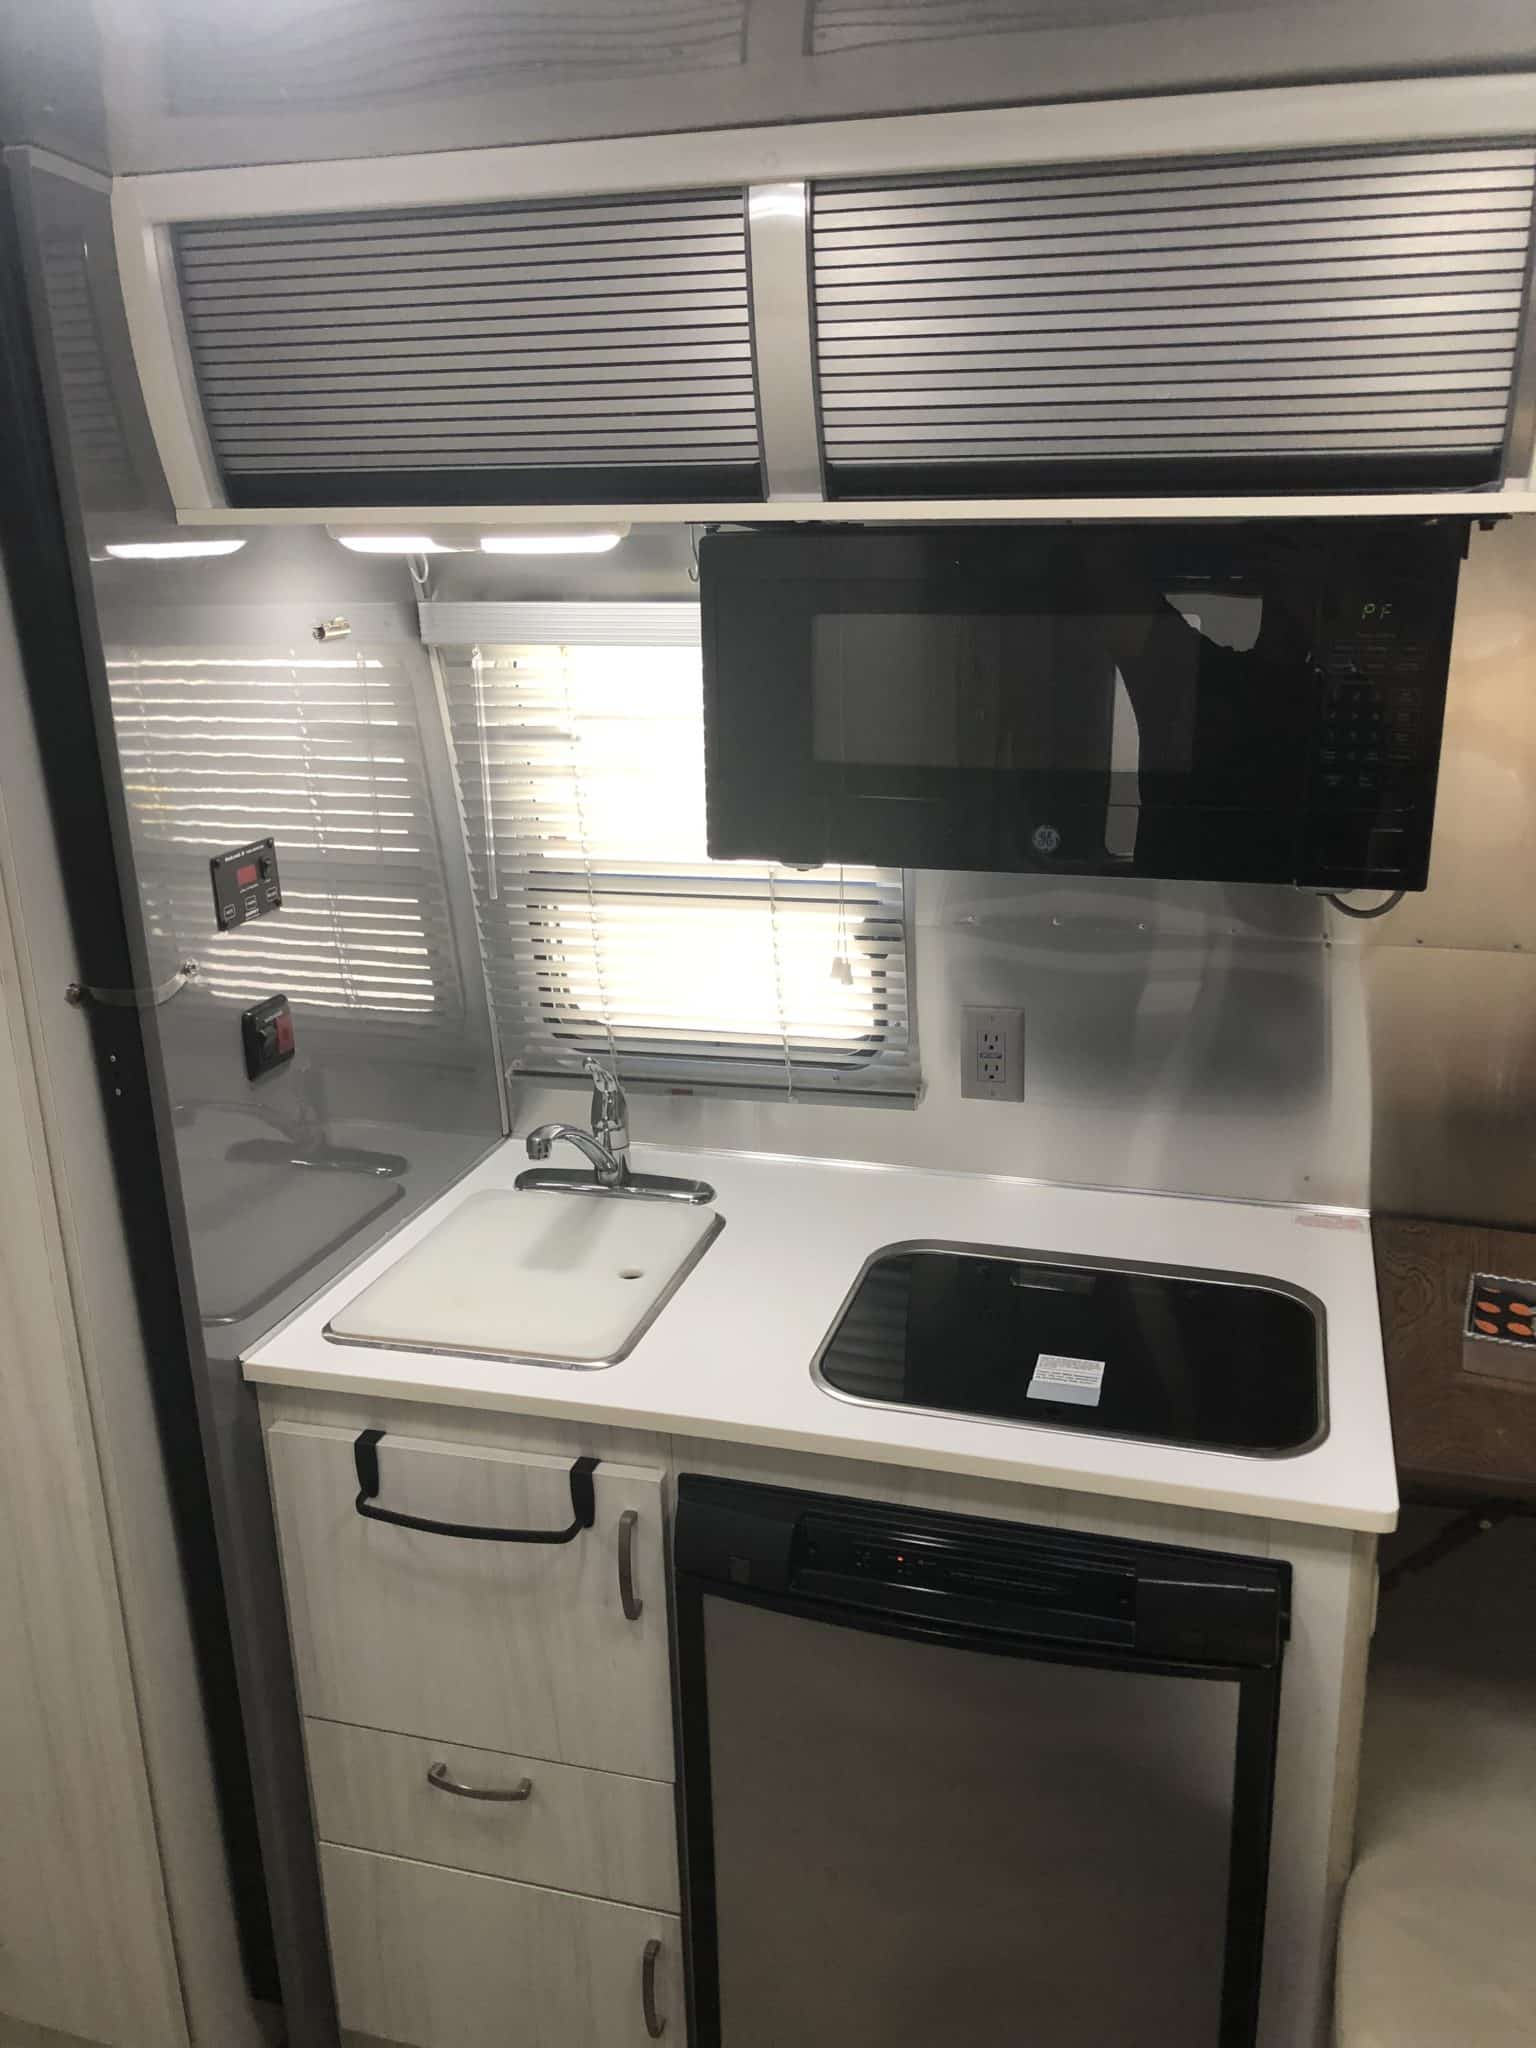 2017 Airstream 16FT Bambi For Sale in Youngsville - Airstream Marketplace